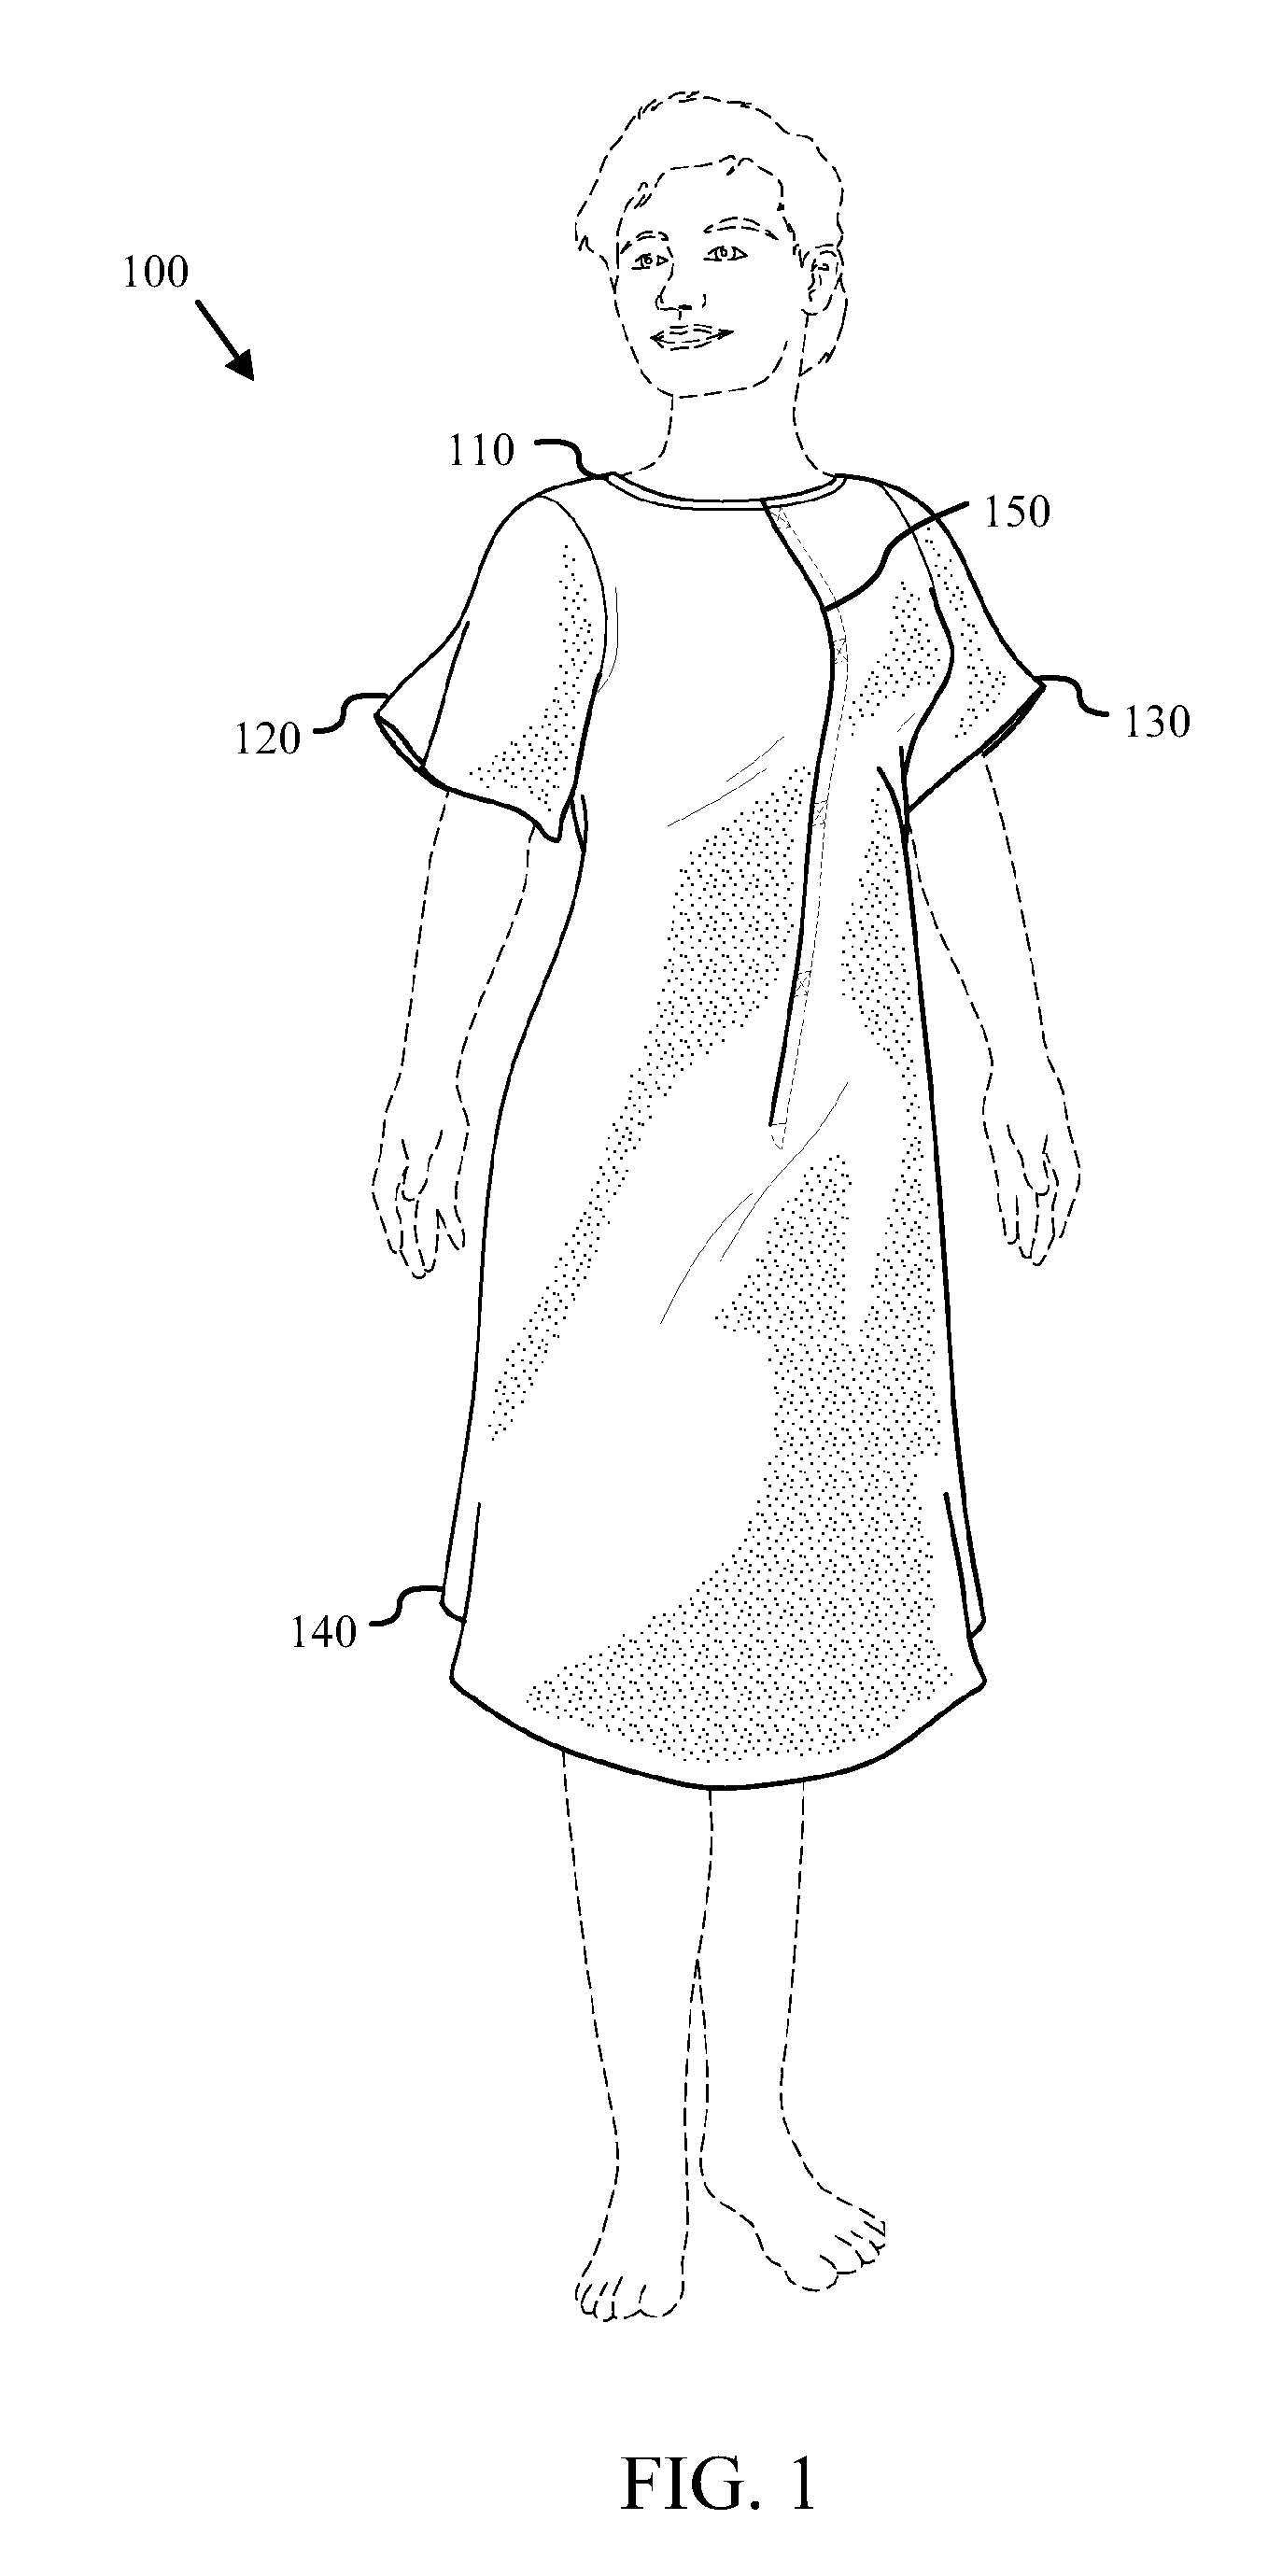 Adaptable medical gown